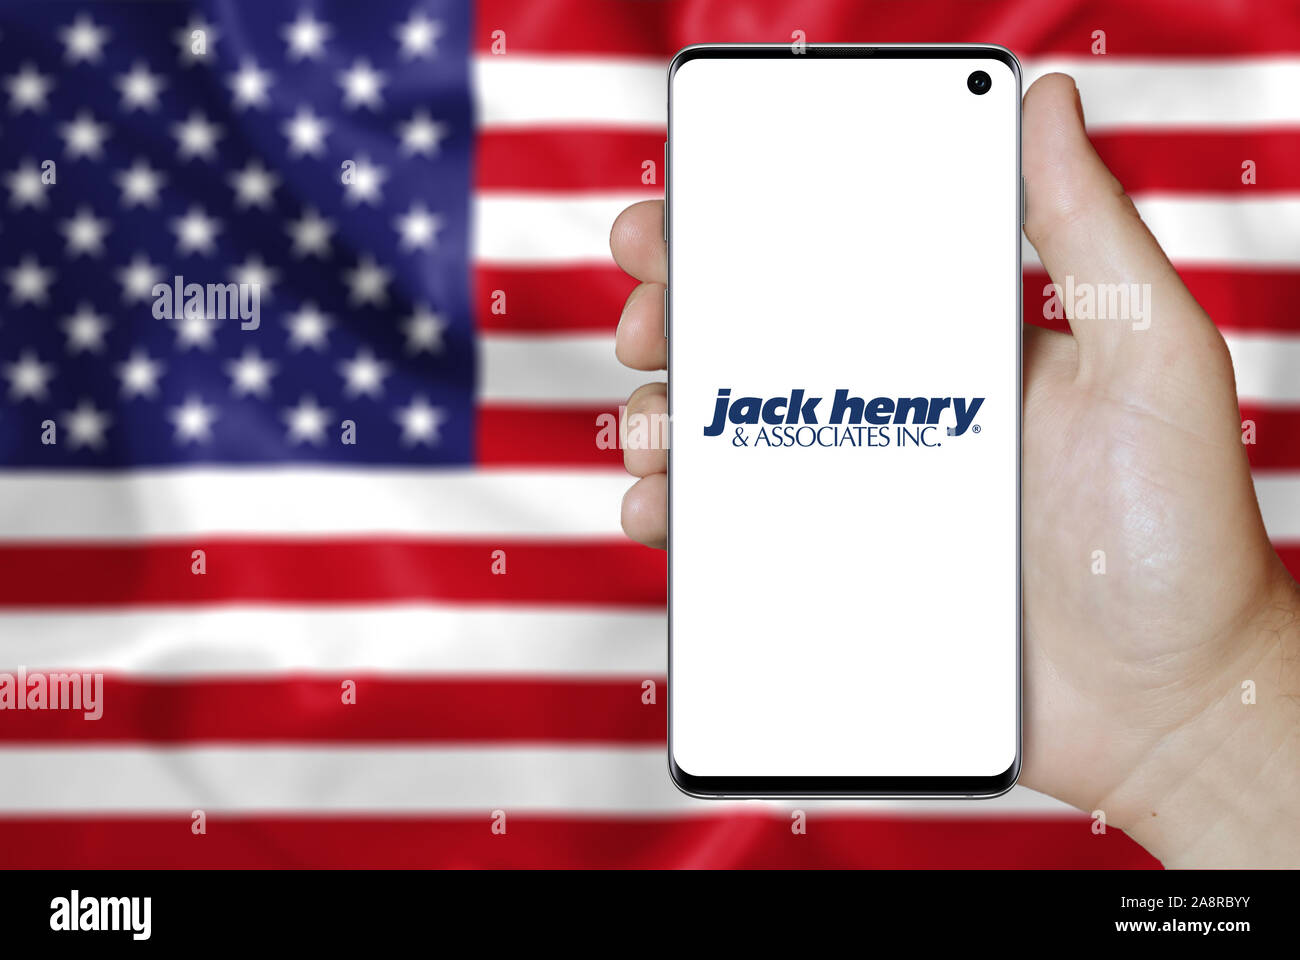 Jack Henry High Resolution Stock Photography and Images - Alamy